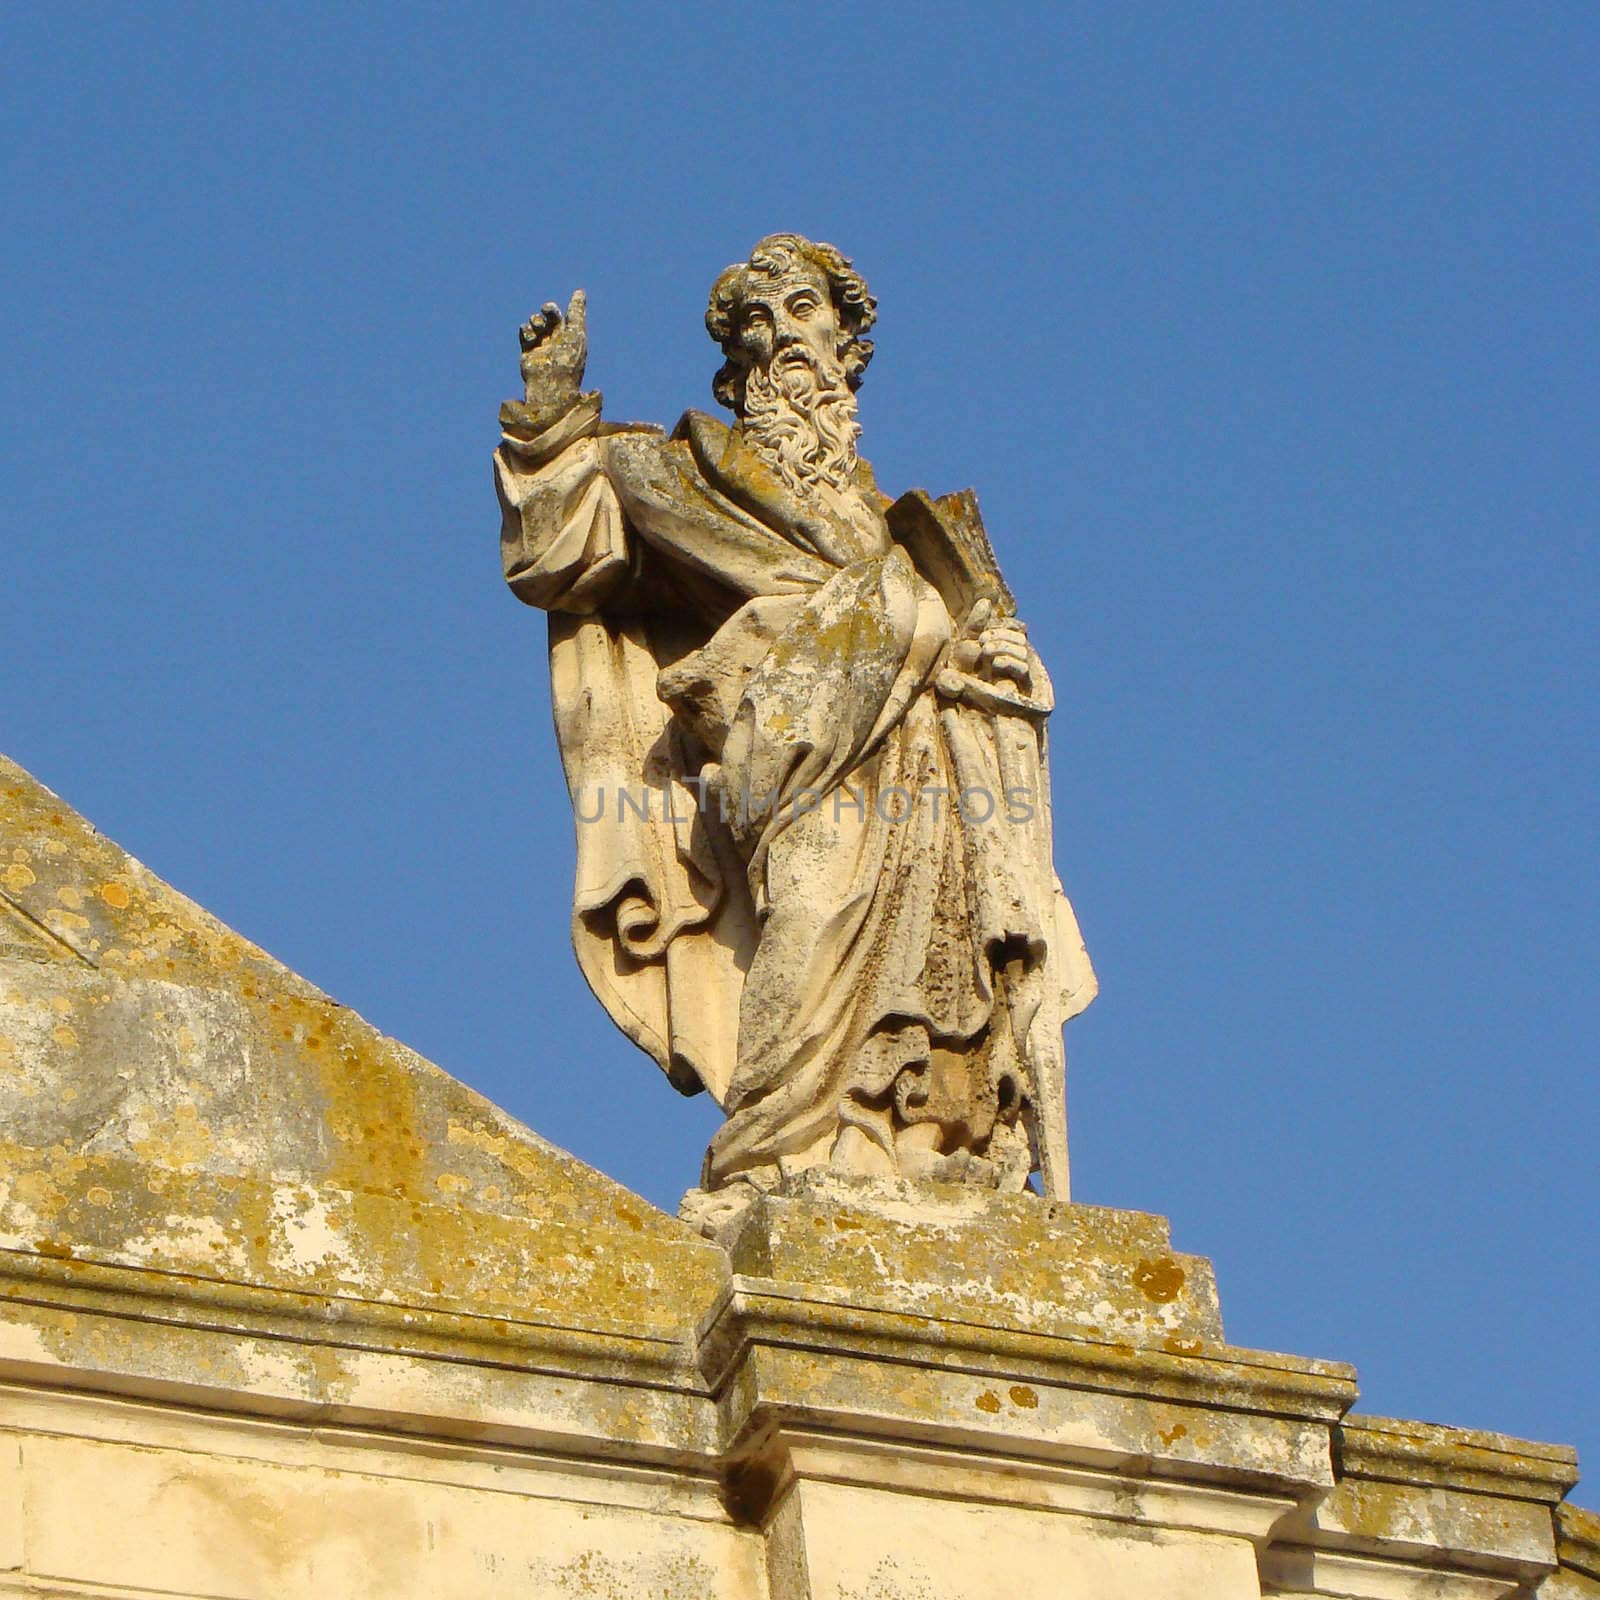 Figure on the roof of the church in Apulia region, Italy